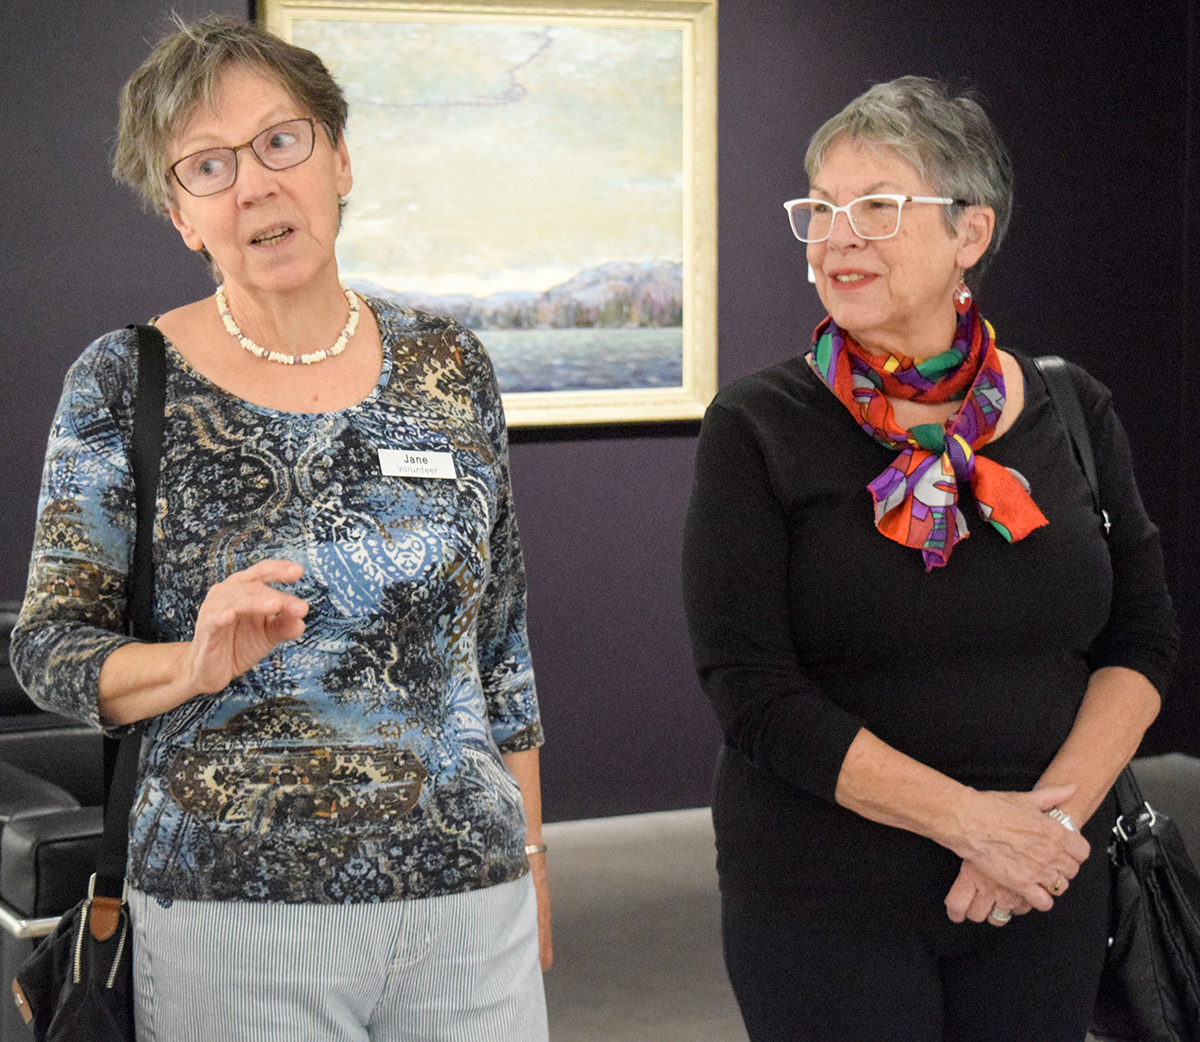 Docent Jane Bouchette, left, conducts a tour at JNAAG with Anne Craig, right, and a group from Wellings of Corunna. Cathy Dobson